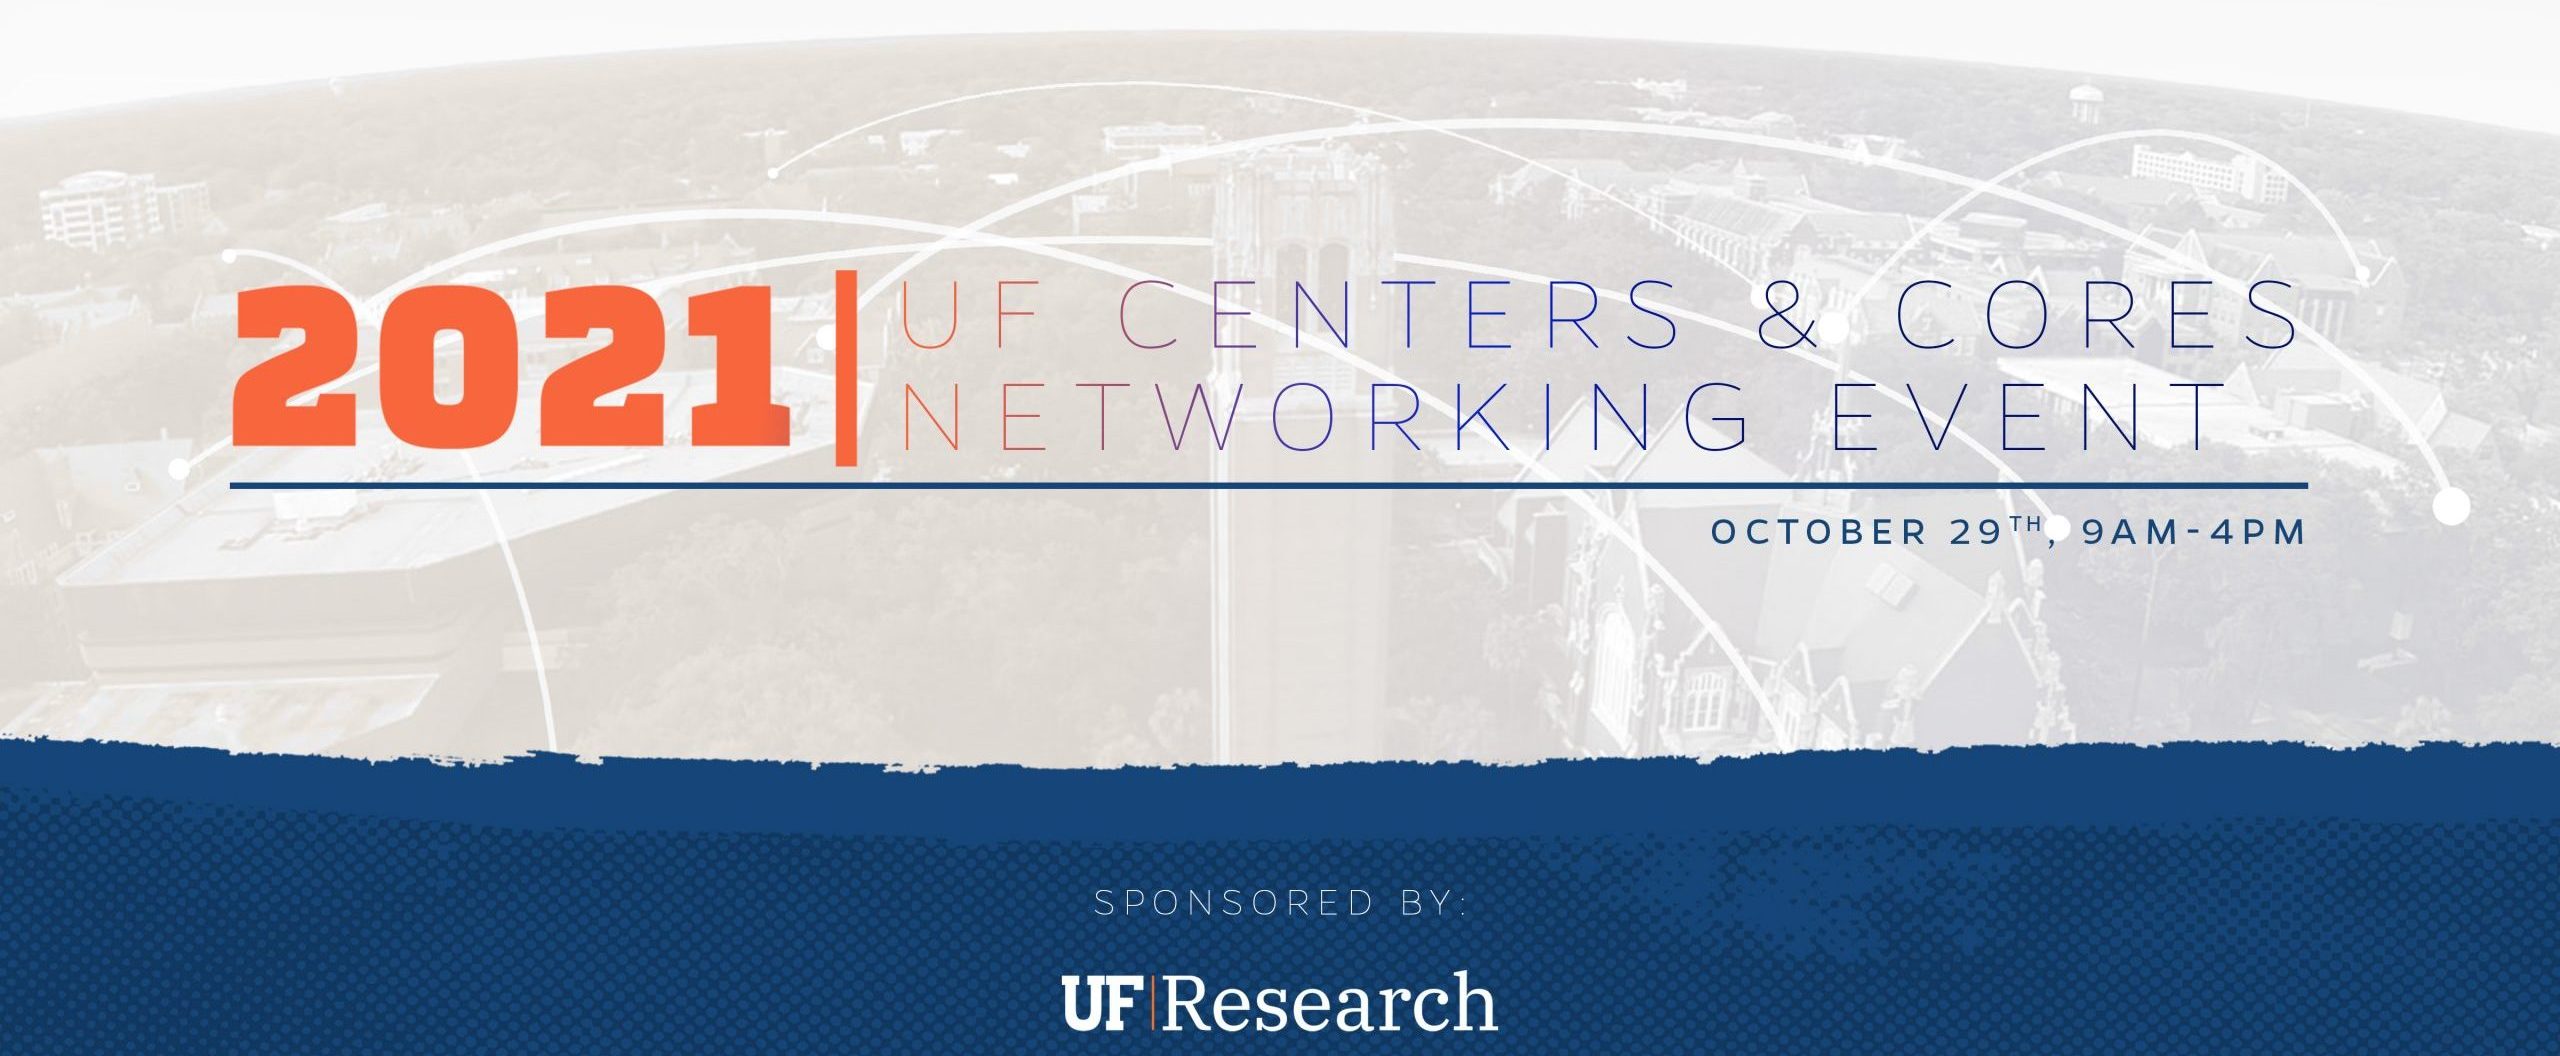 2021 UF Centers & Cores Networking Event UF ICBR